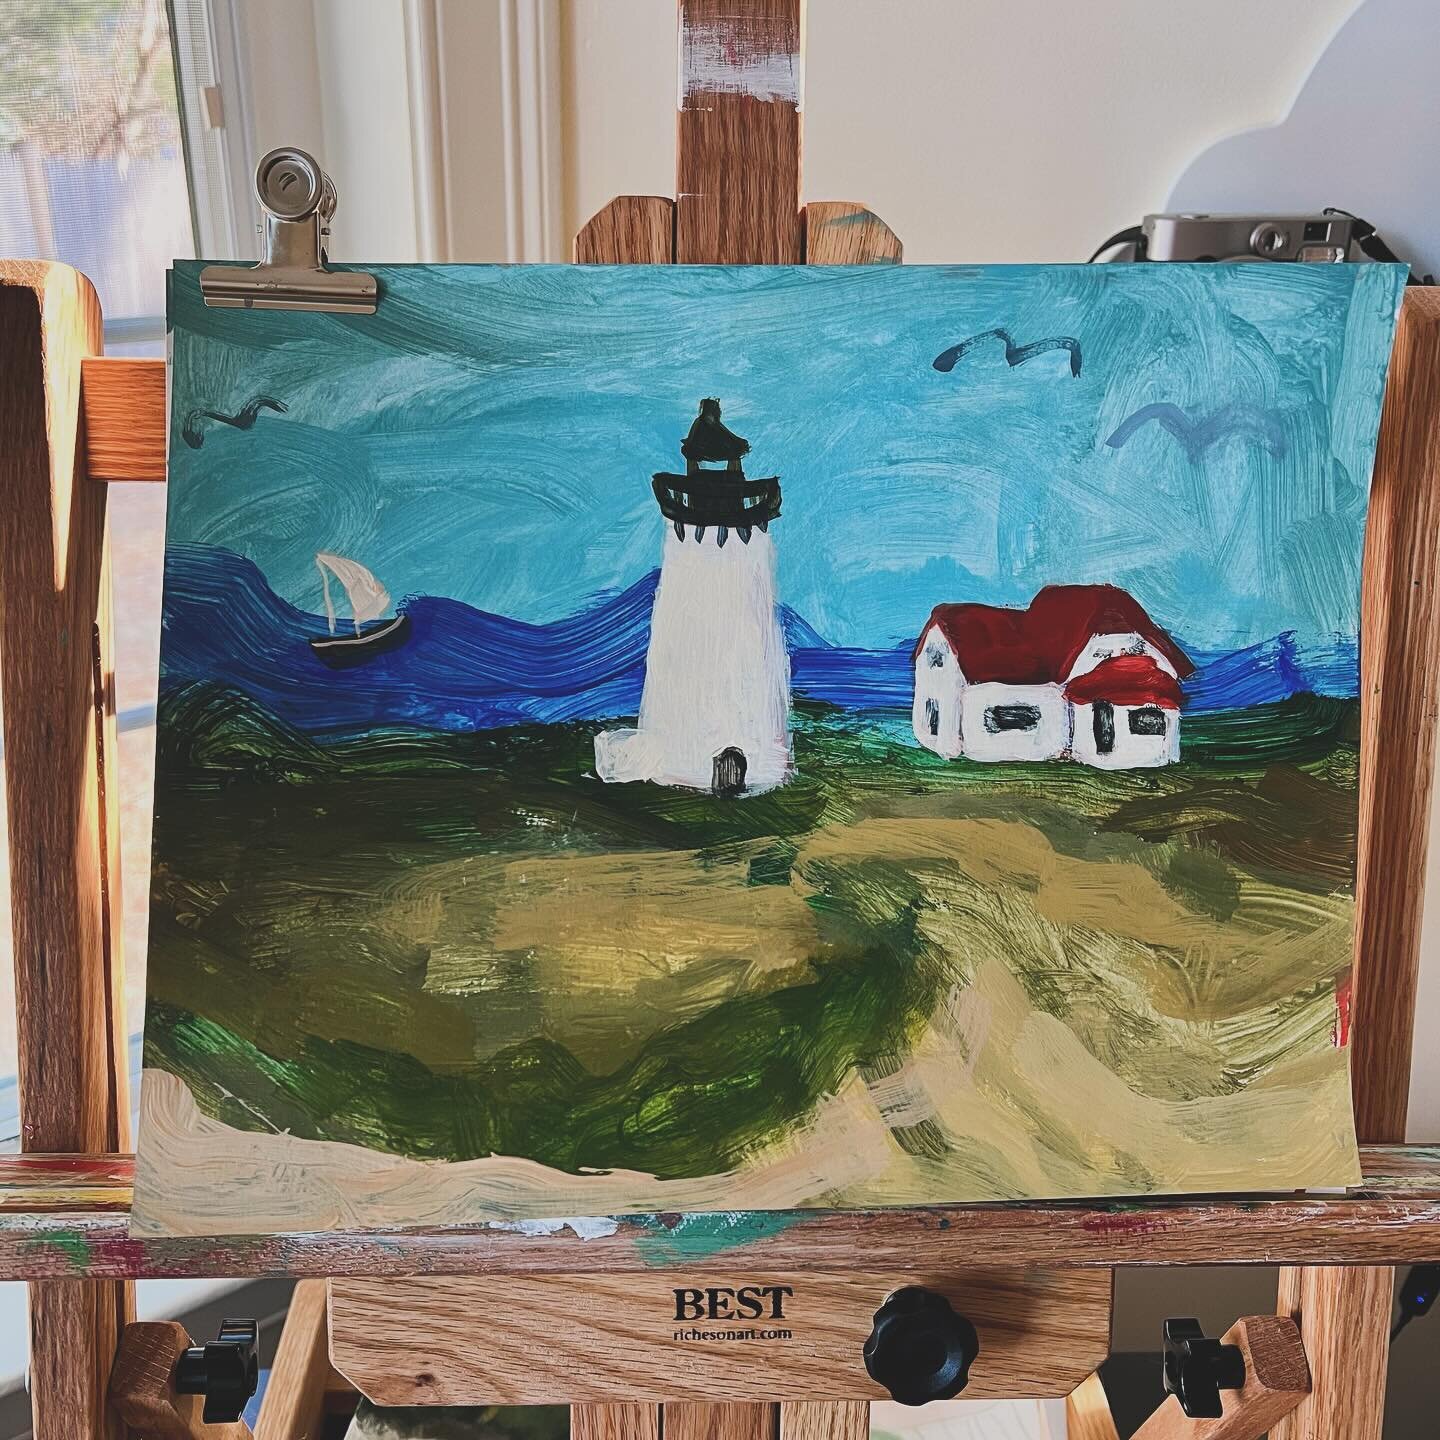 Loosening up! This was a fun one for sure. Race Point Lighthouse - Cape Cod 🐟

#newenglandartist #newenglandart #loosepainting #landscapepaintings #ontheeasel